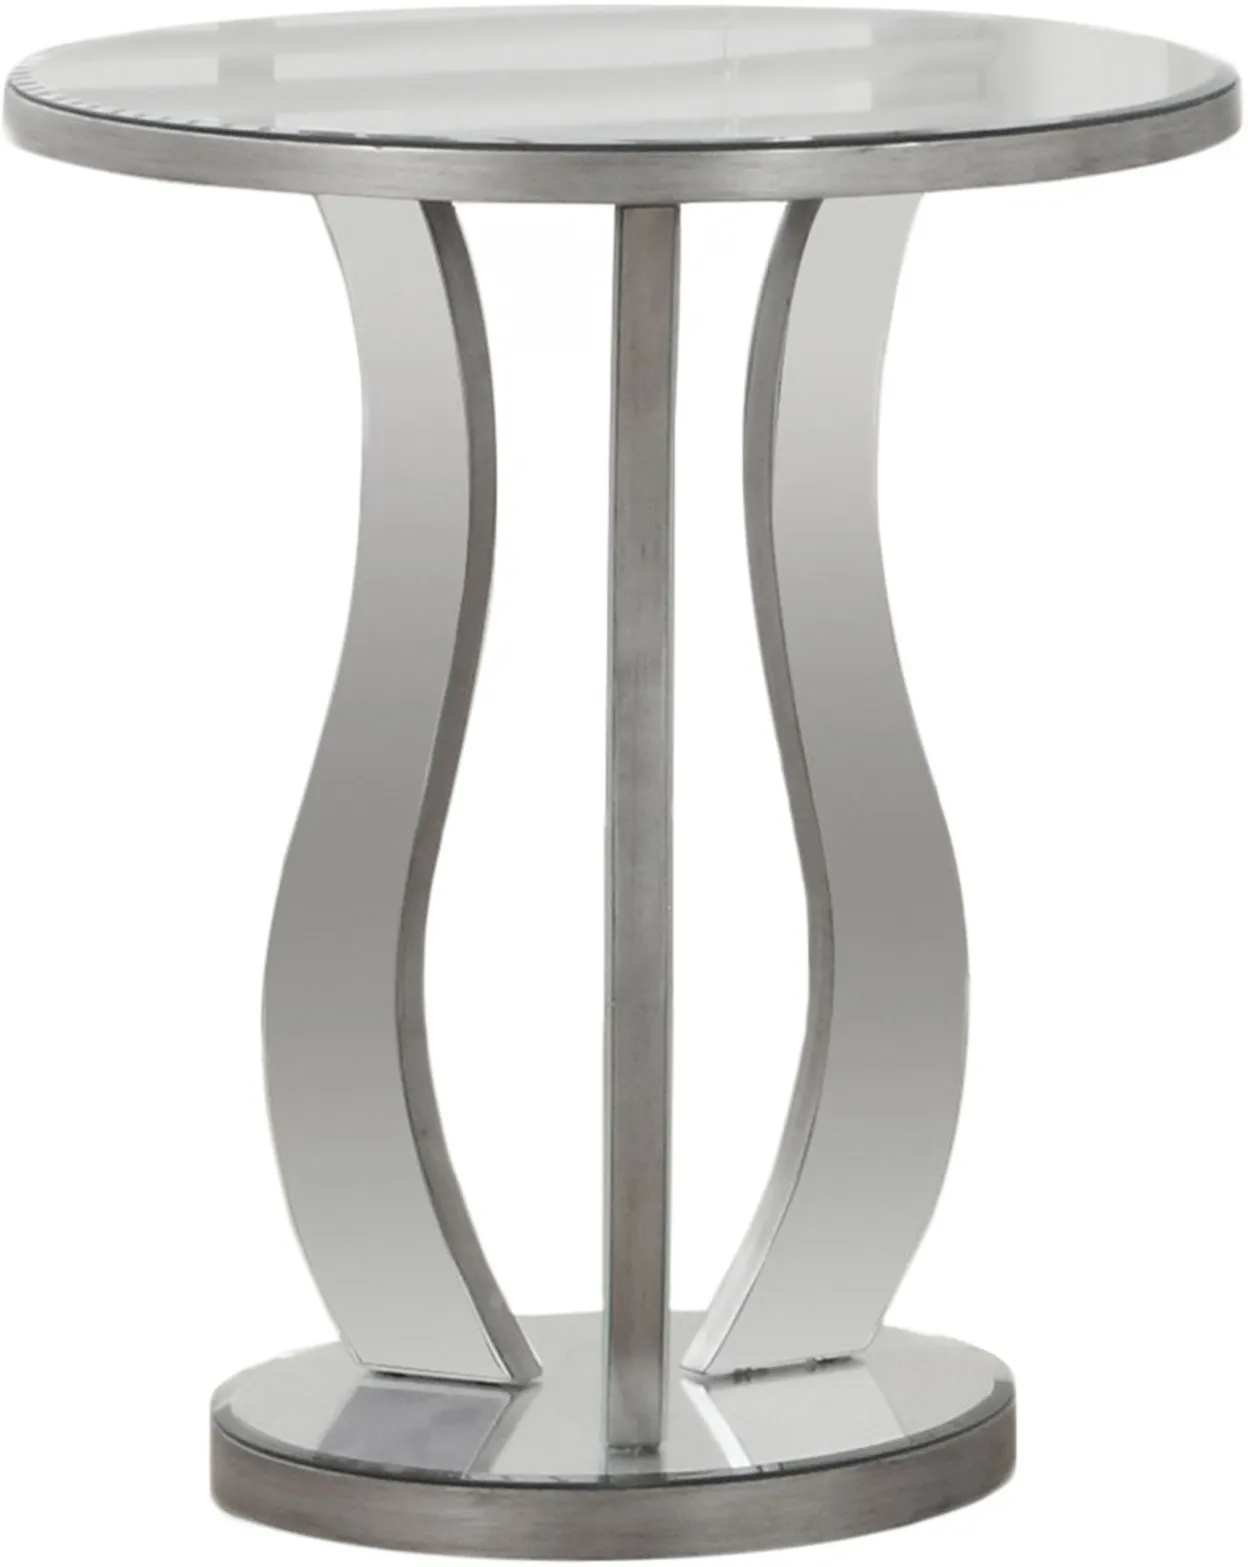 Accent Table, Side, End, Nightstand, Lamp, Living Room, Bedroom, Mirror, Grey, Clear, Transitional